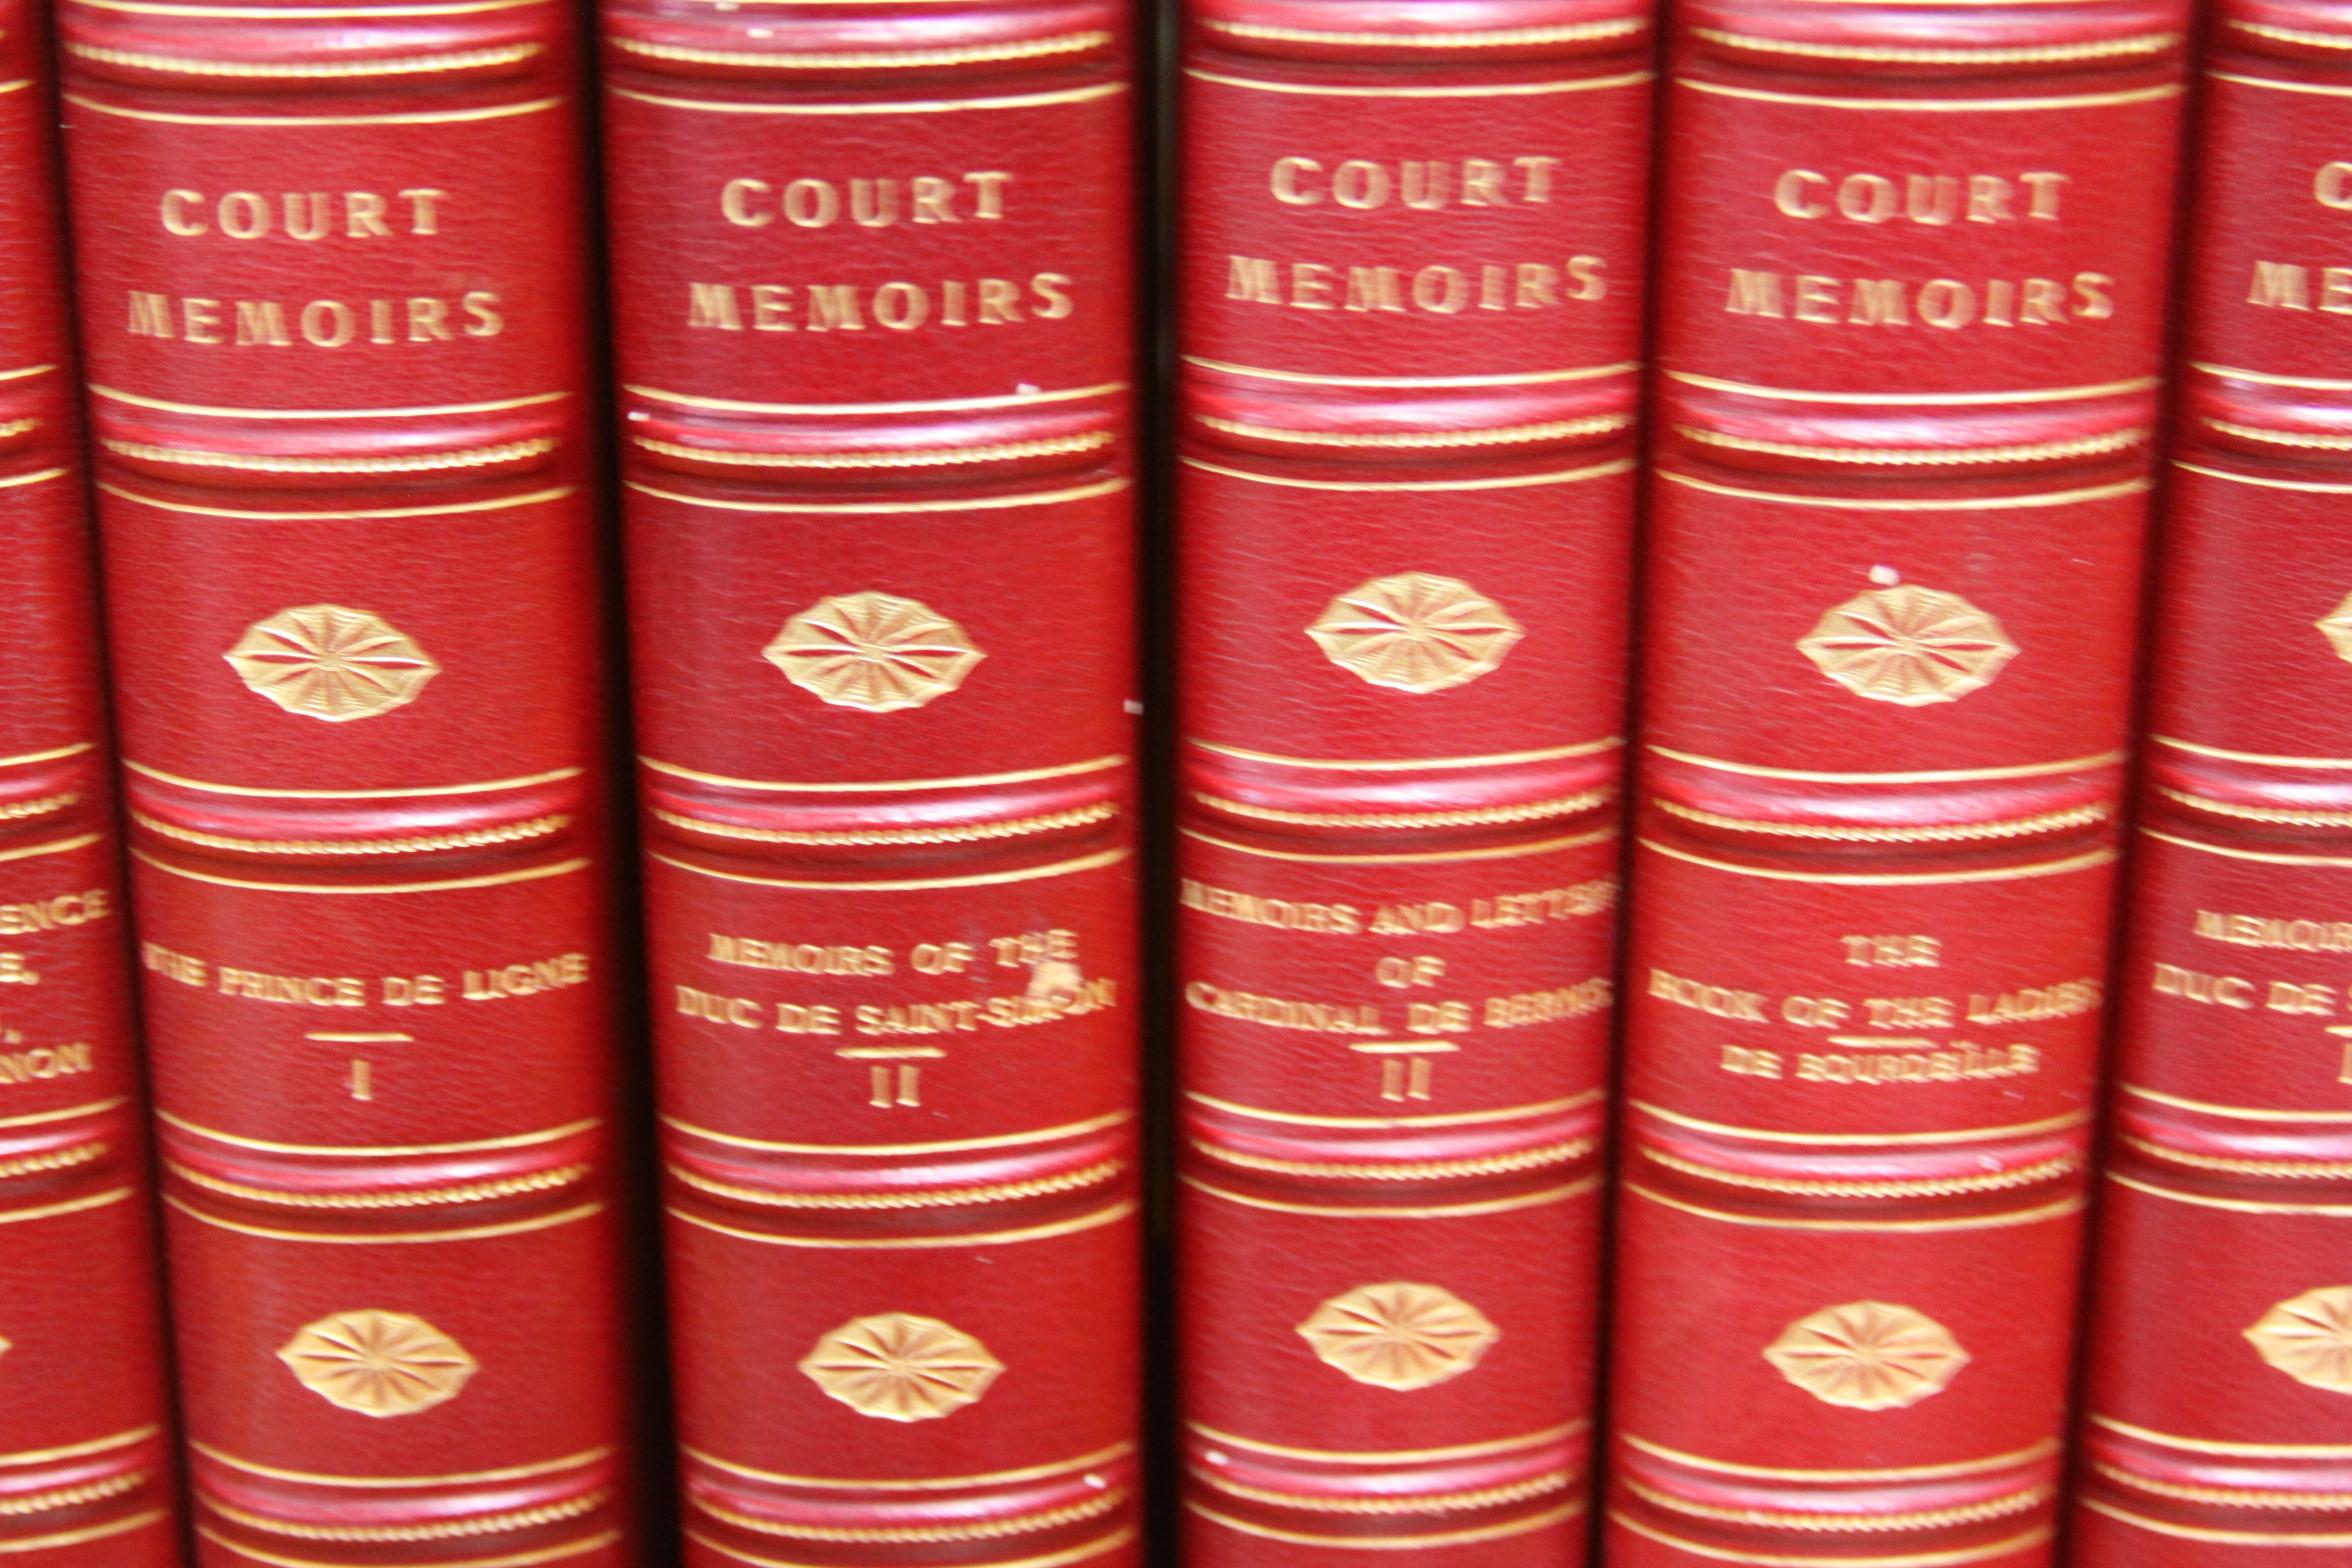 20th Century Collections of Leather bound Antiques  Books , The Royal Court Memoirs  